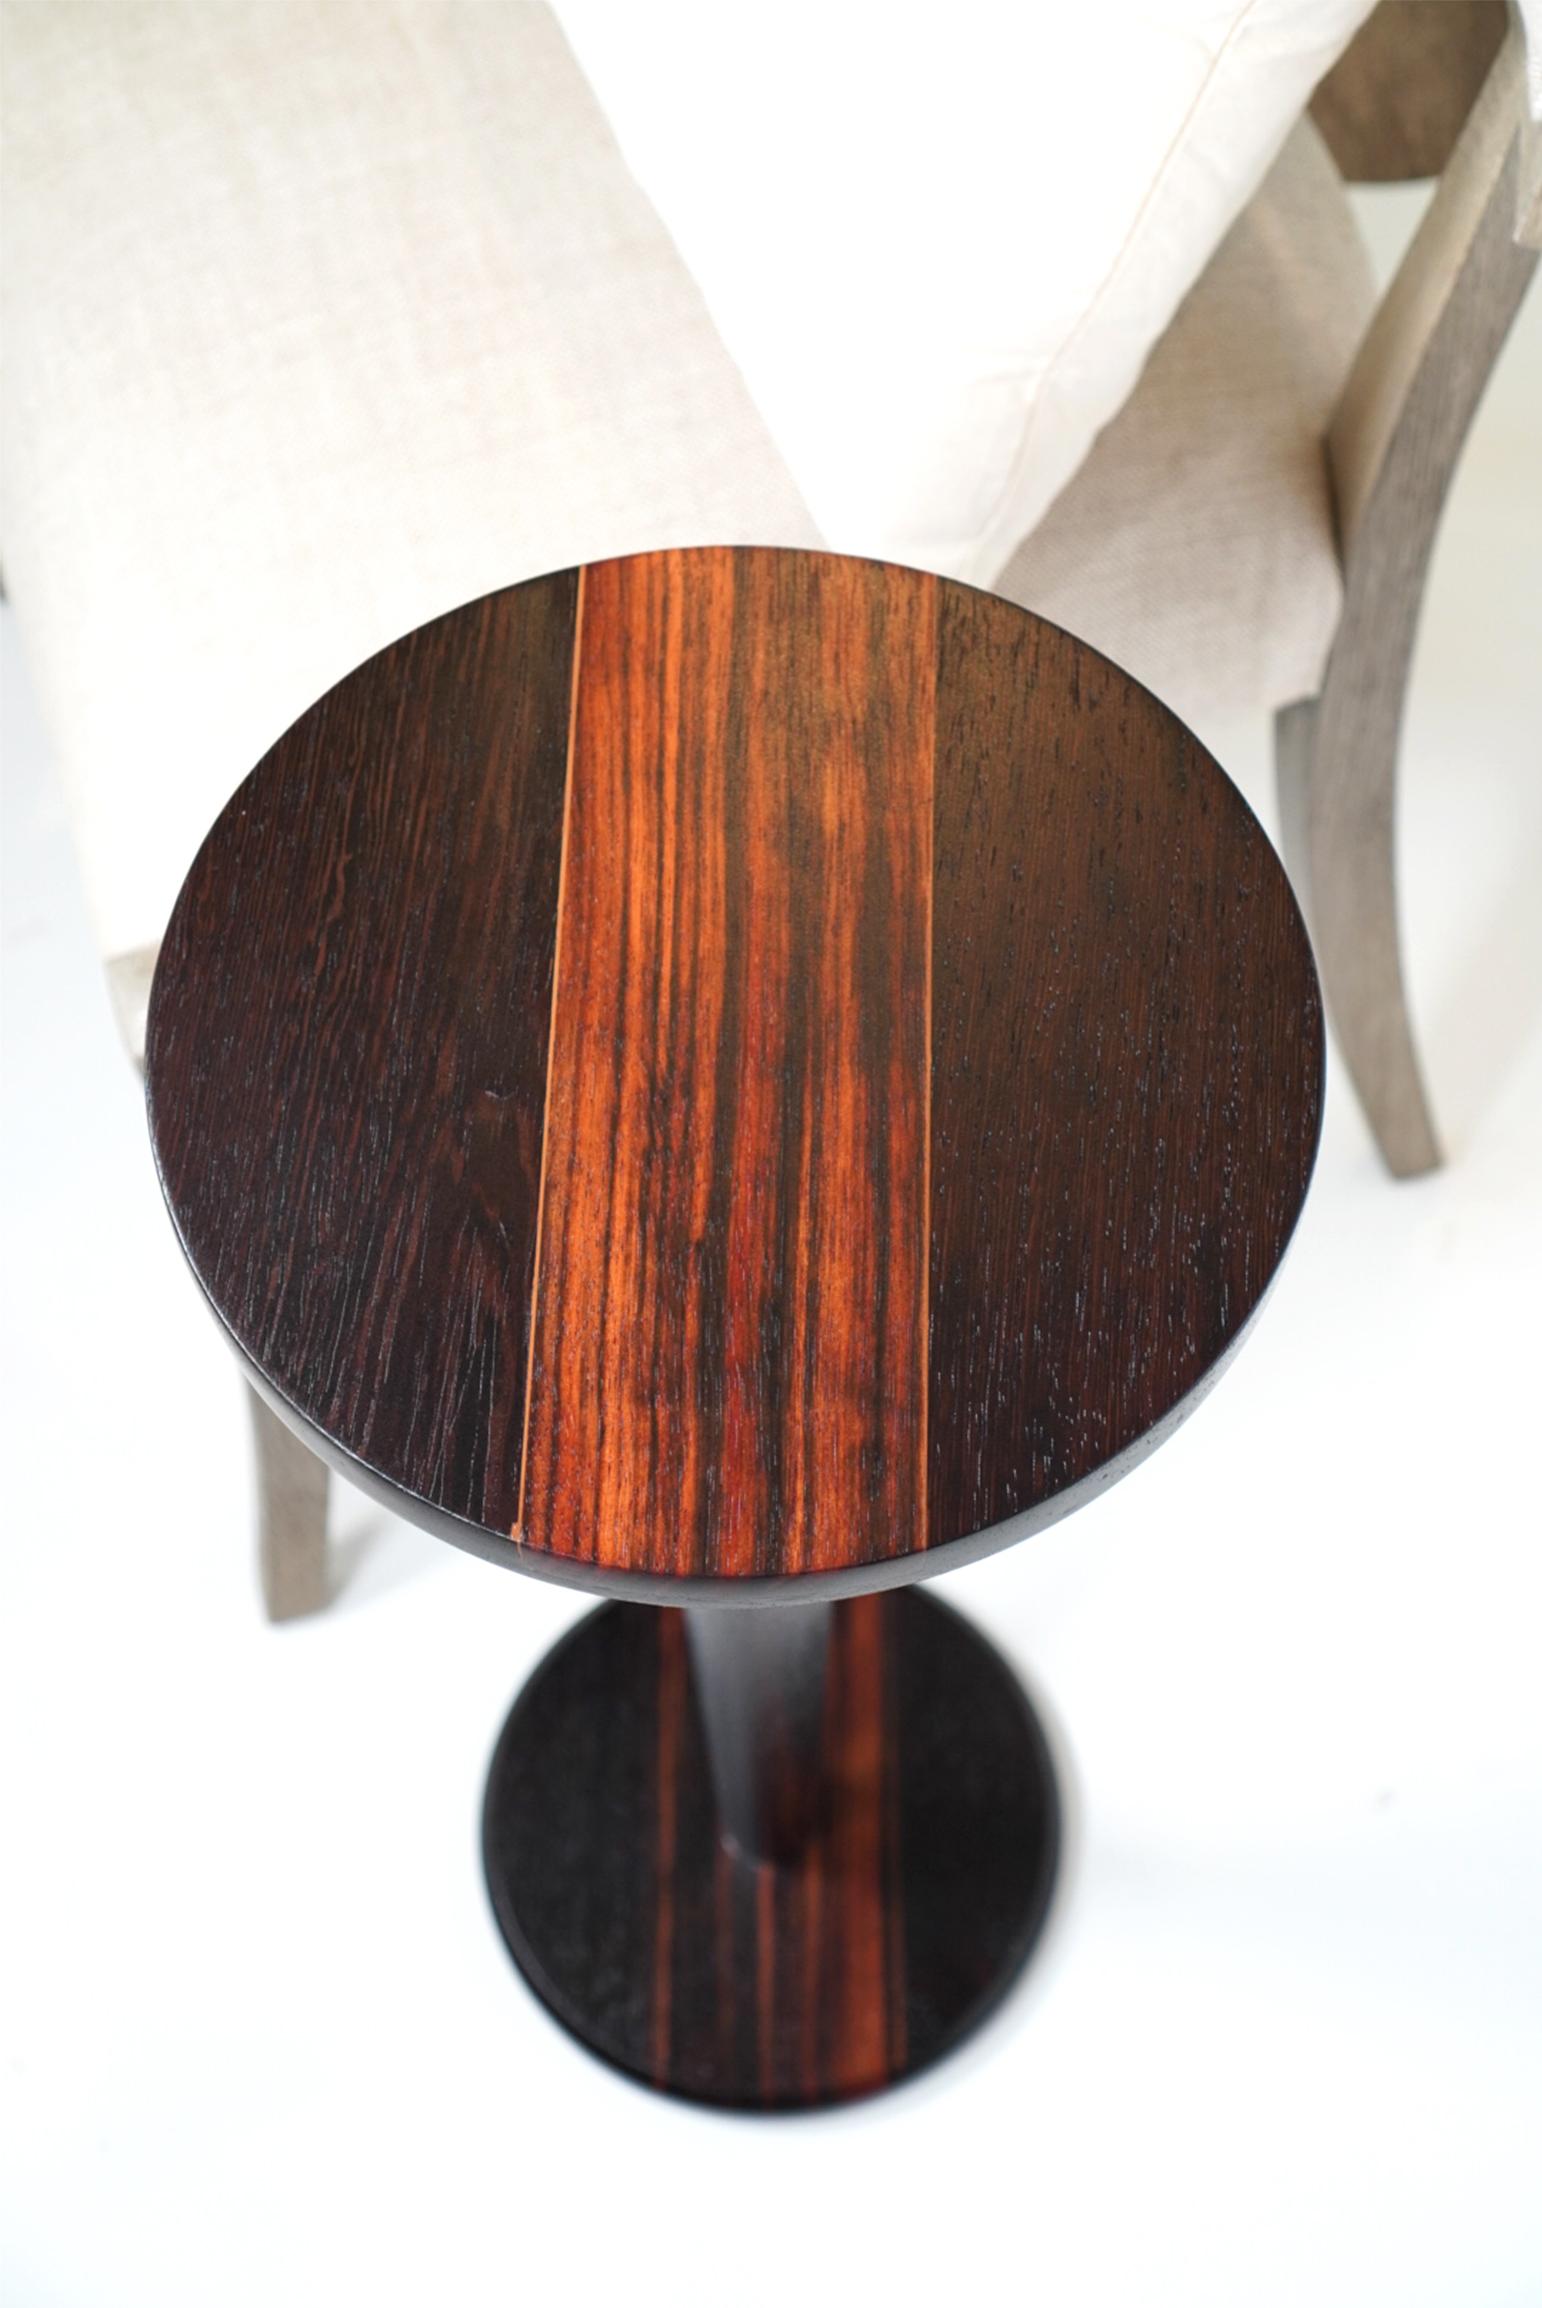 Introducing the 21st Century Mid-Century Modern Inspired Wenge and Macassar Ebony Cocktail Table, a masterpiece from the Walker Design Studios Made to Order Collection. Crafted with exotic hardwoods sourced from across the globe, this stunning piece